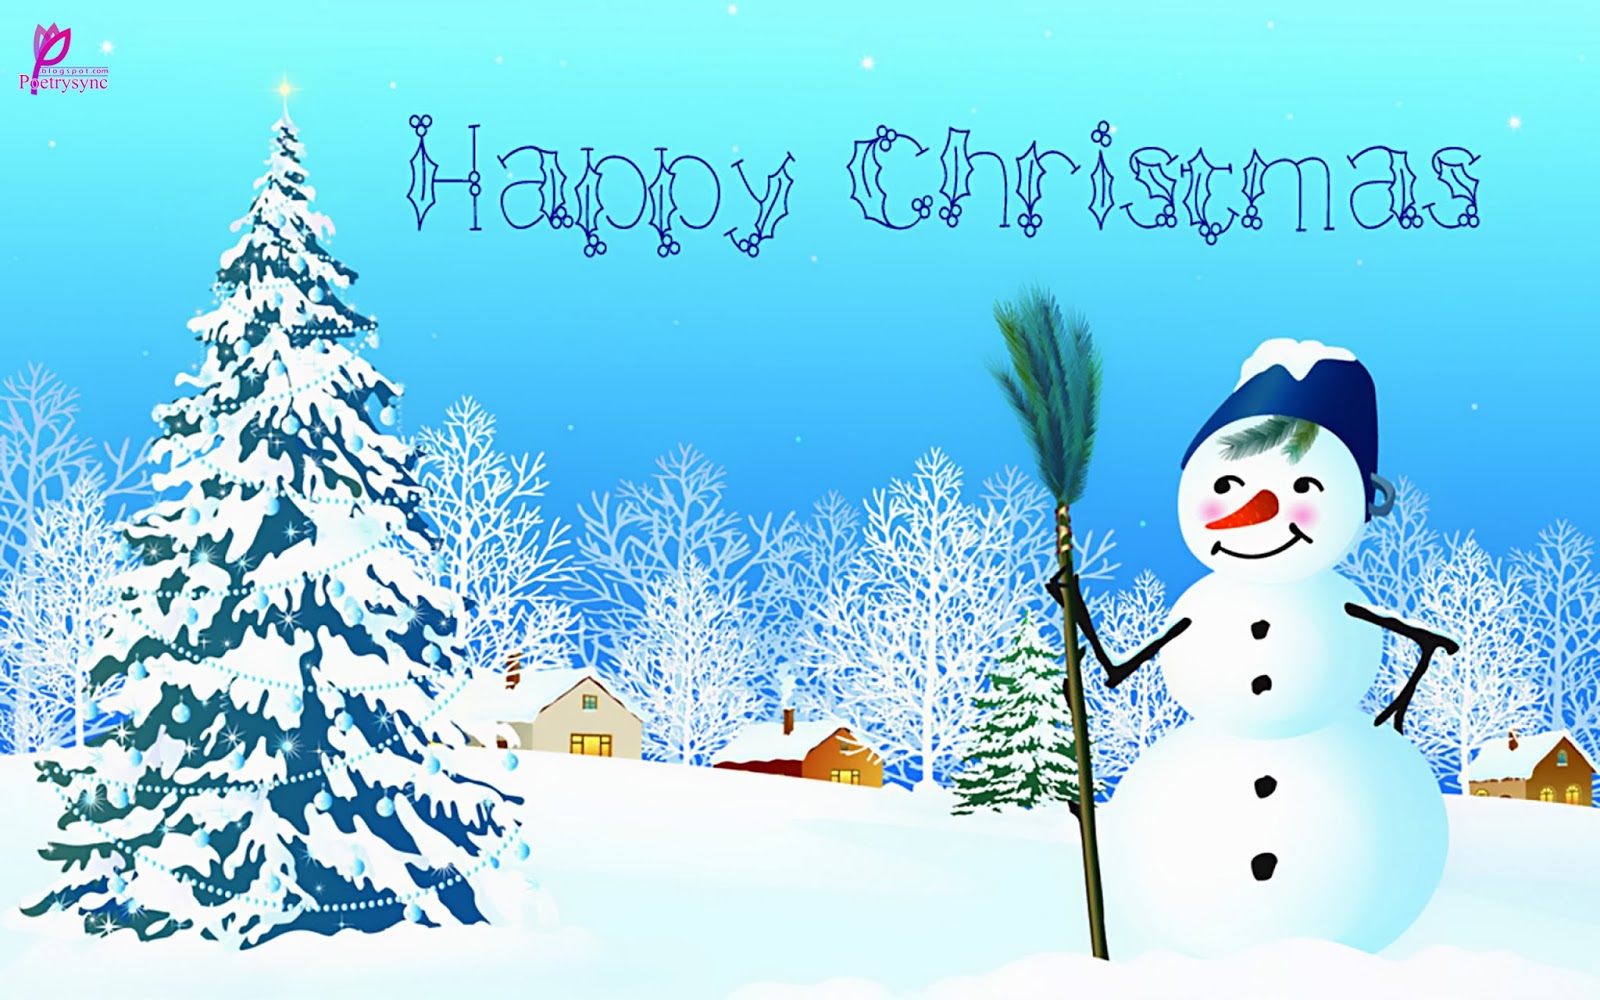 Christmas Wishes With Snowman Greetings HD Wallpaper For